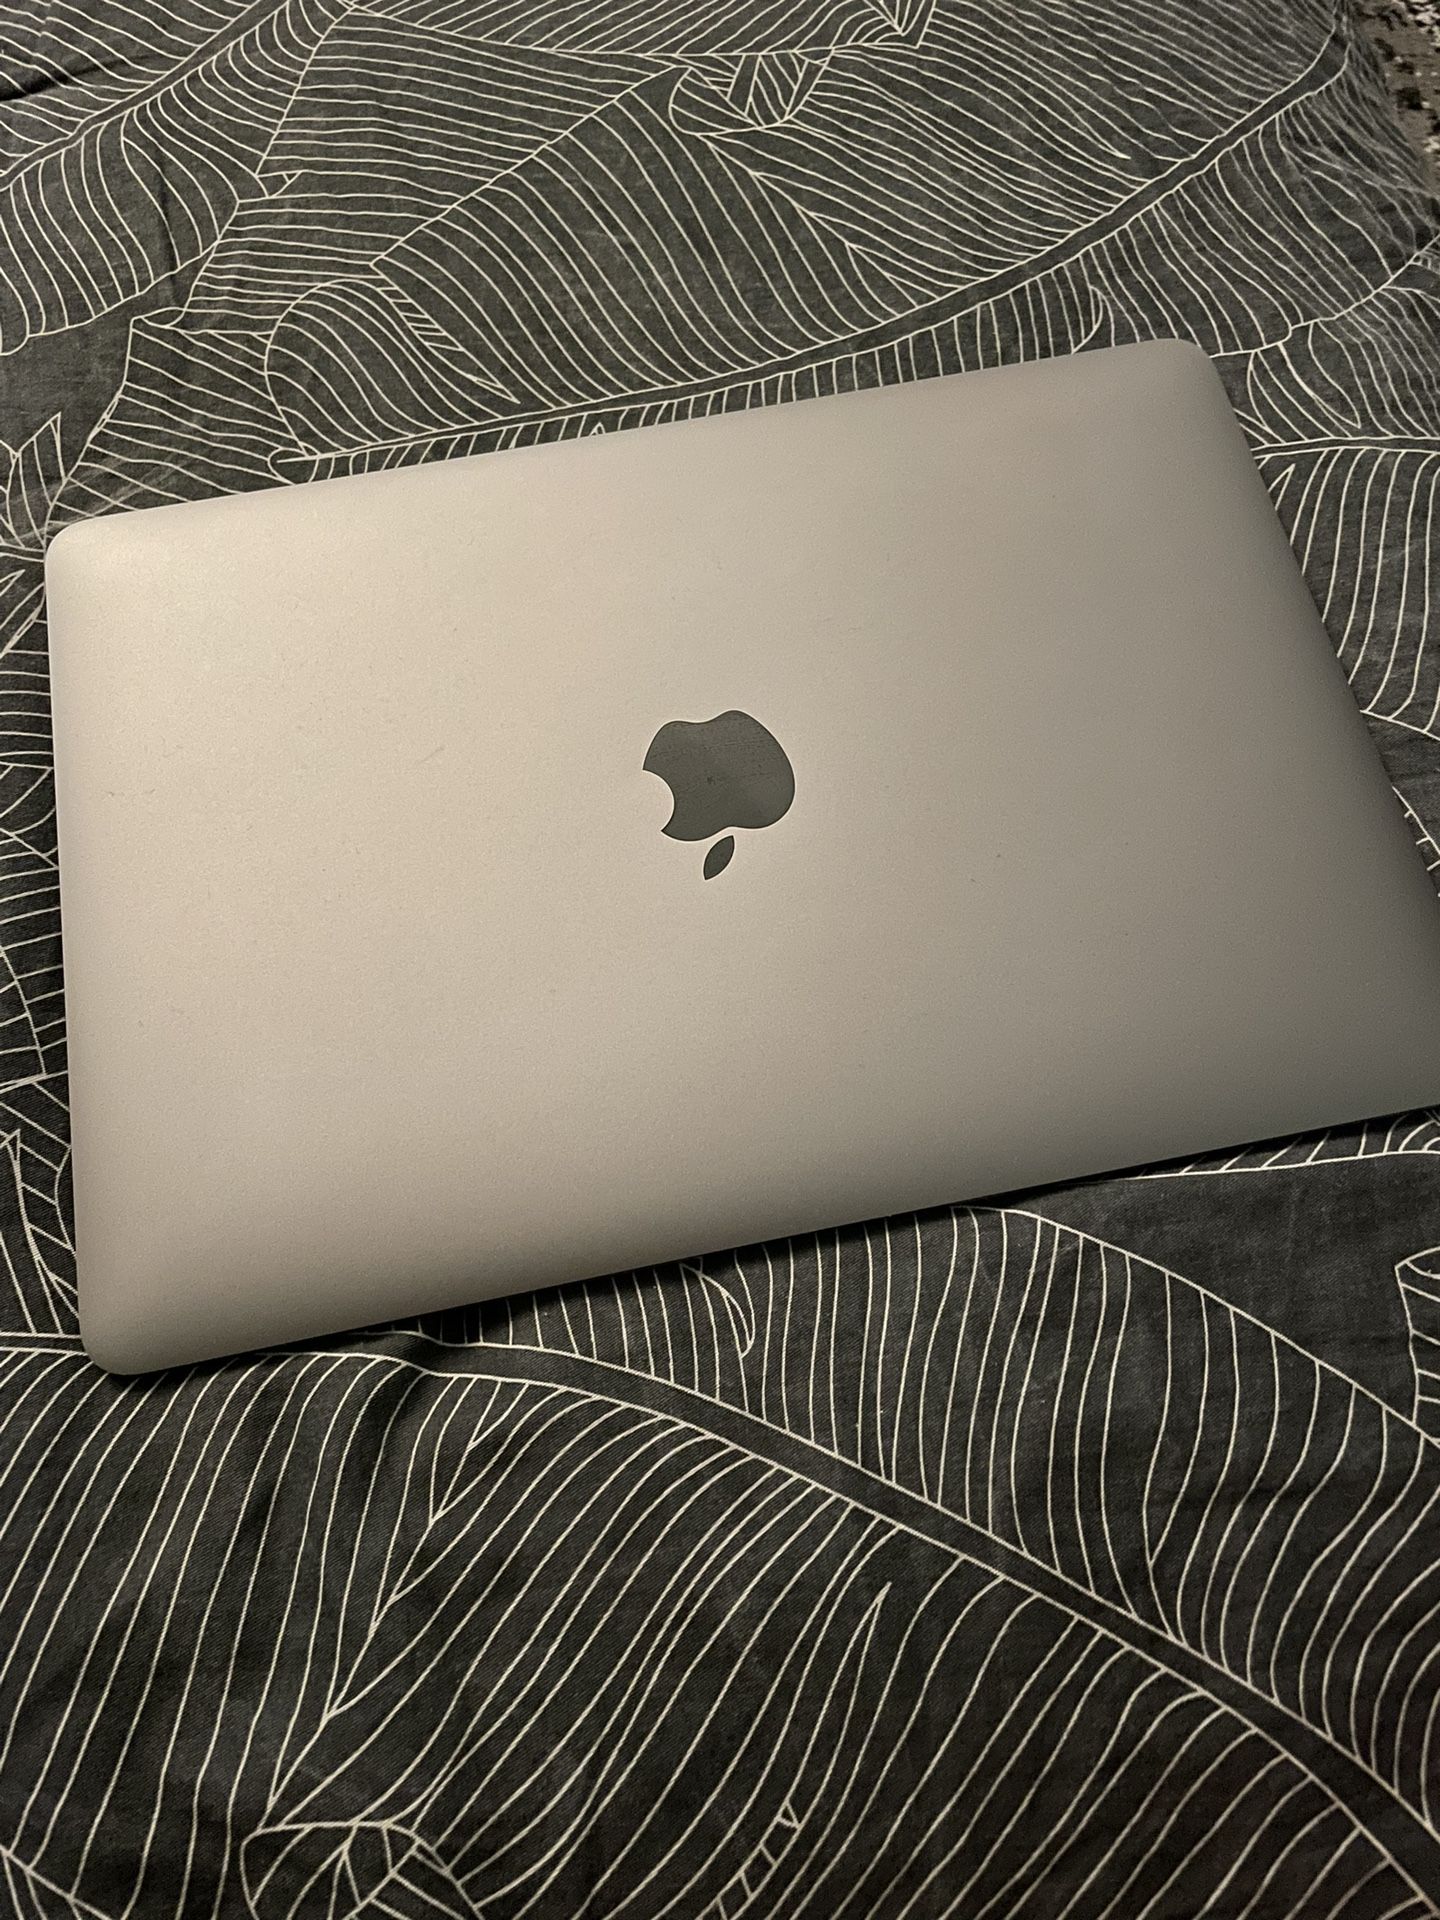 Apple MacBook 12in Laptop w/ Retina Display 1.2GHz Core M, (MJY42LL/A), 8GB Memory, 512GB Solid State Drive, Space Gray (Space Gray)